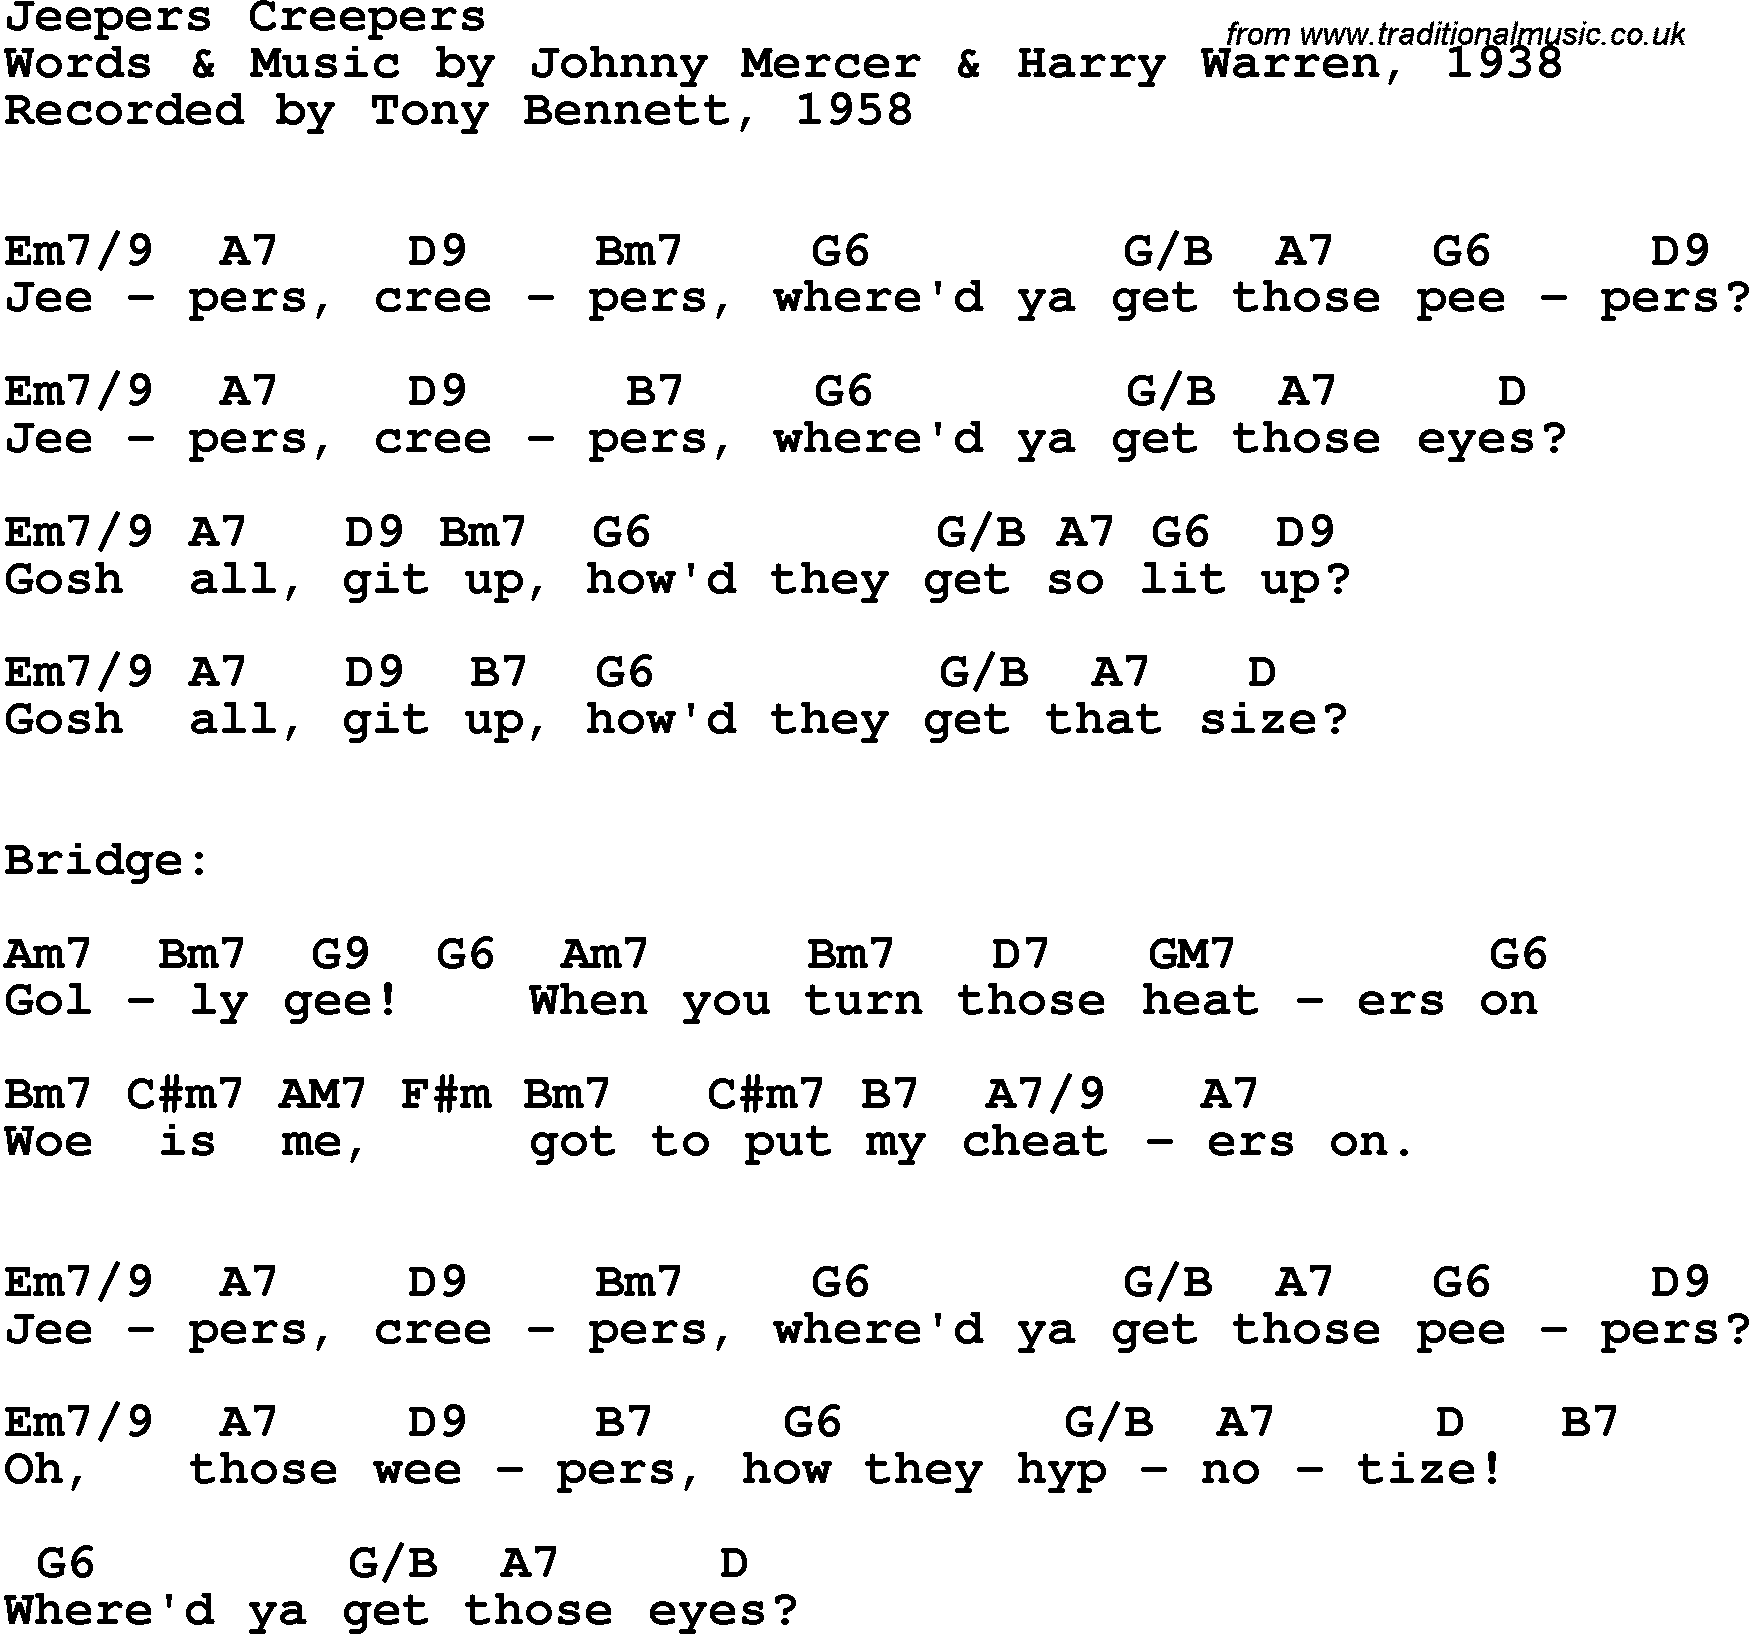 Song Lyrics with guitar chords for Jeepers Creepers - Tony Bennett, 1958